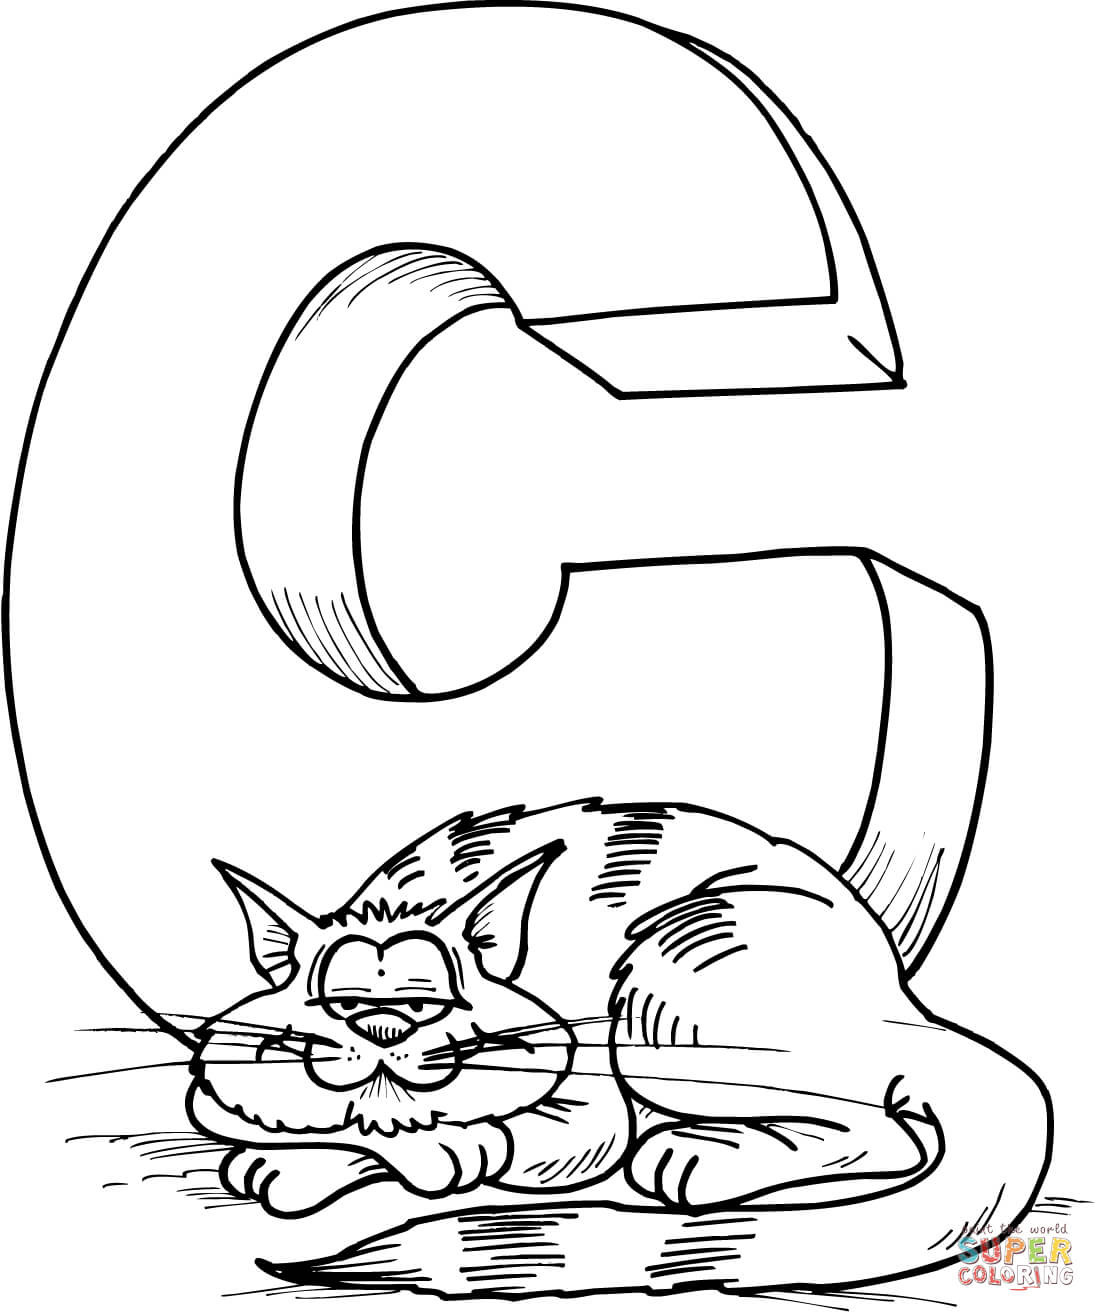 C Coloring Pages
 Letter C is for Cat coloring page